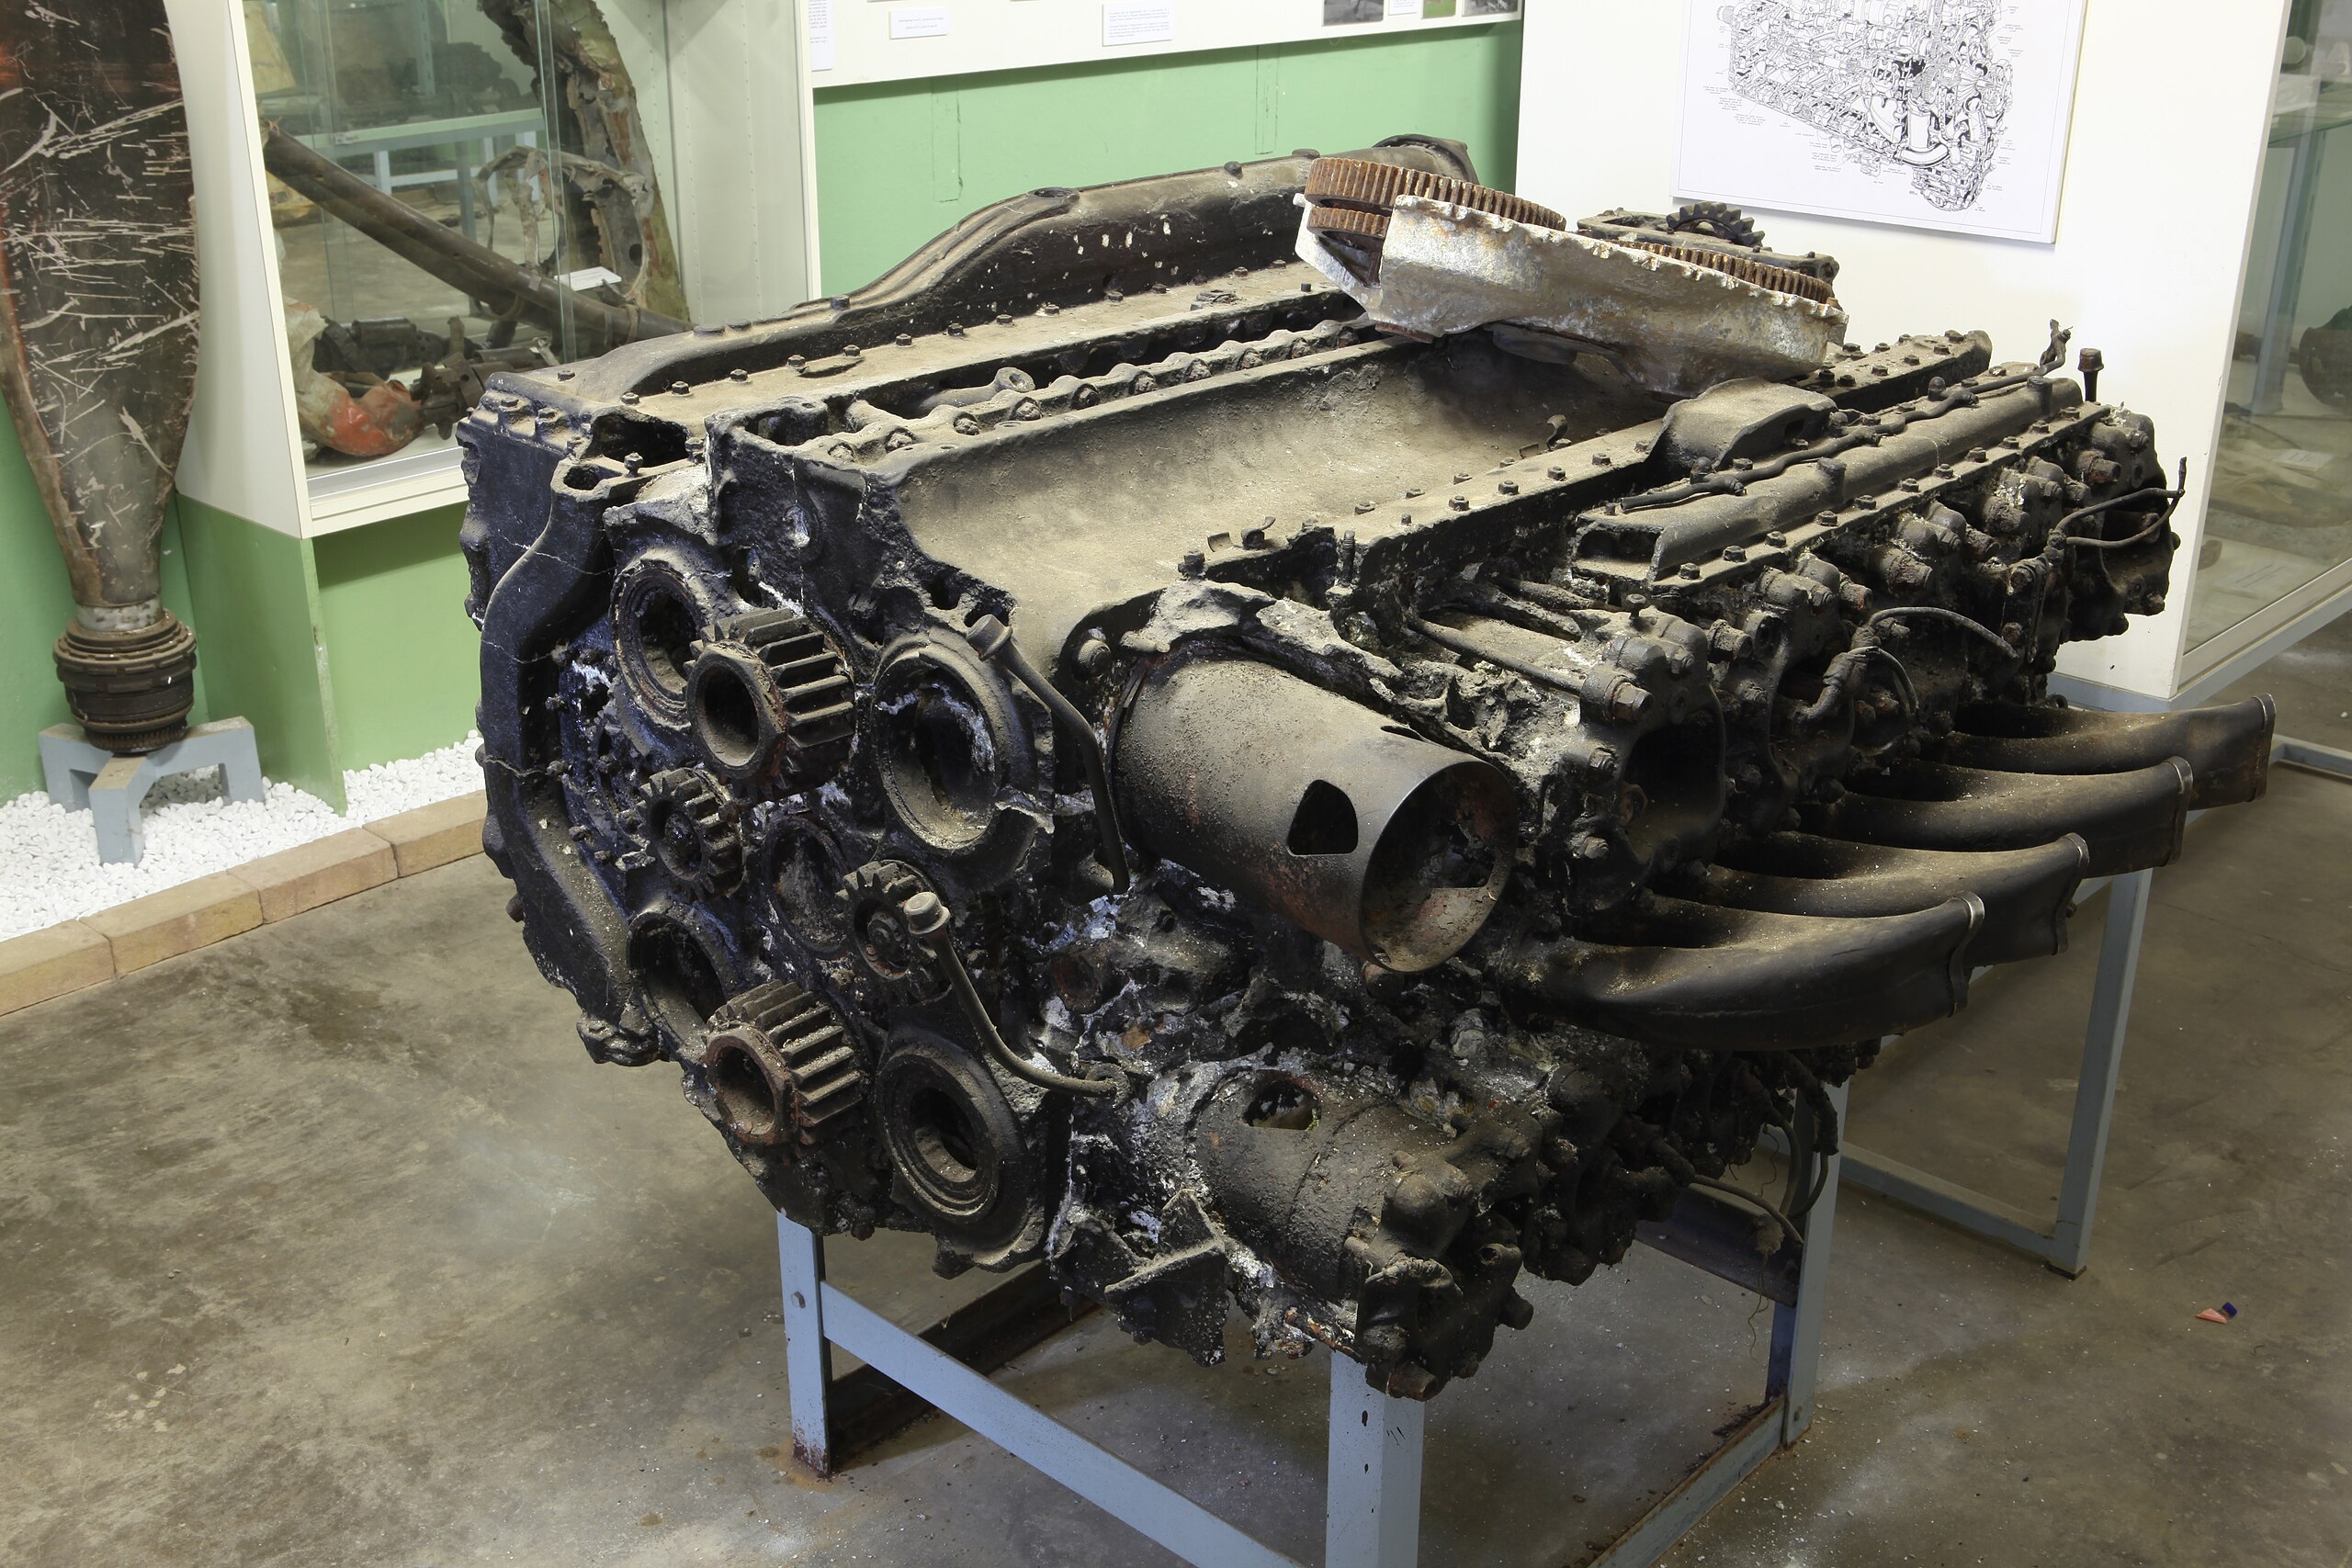 File:Napier Sabre II A Engine from Hawker Typhoon or Tempest